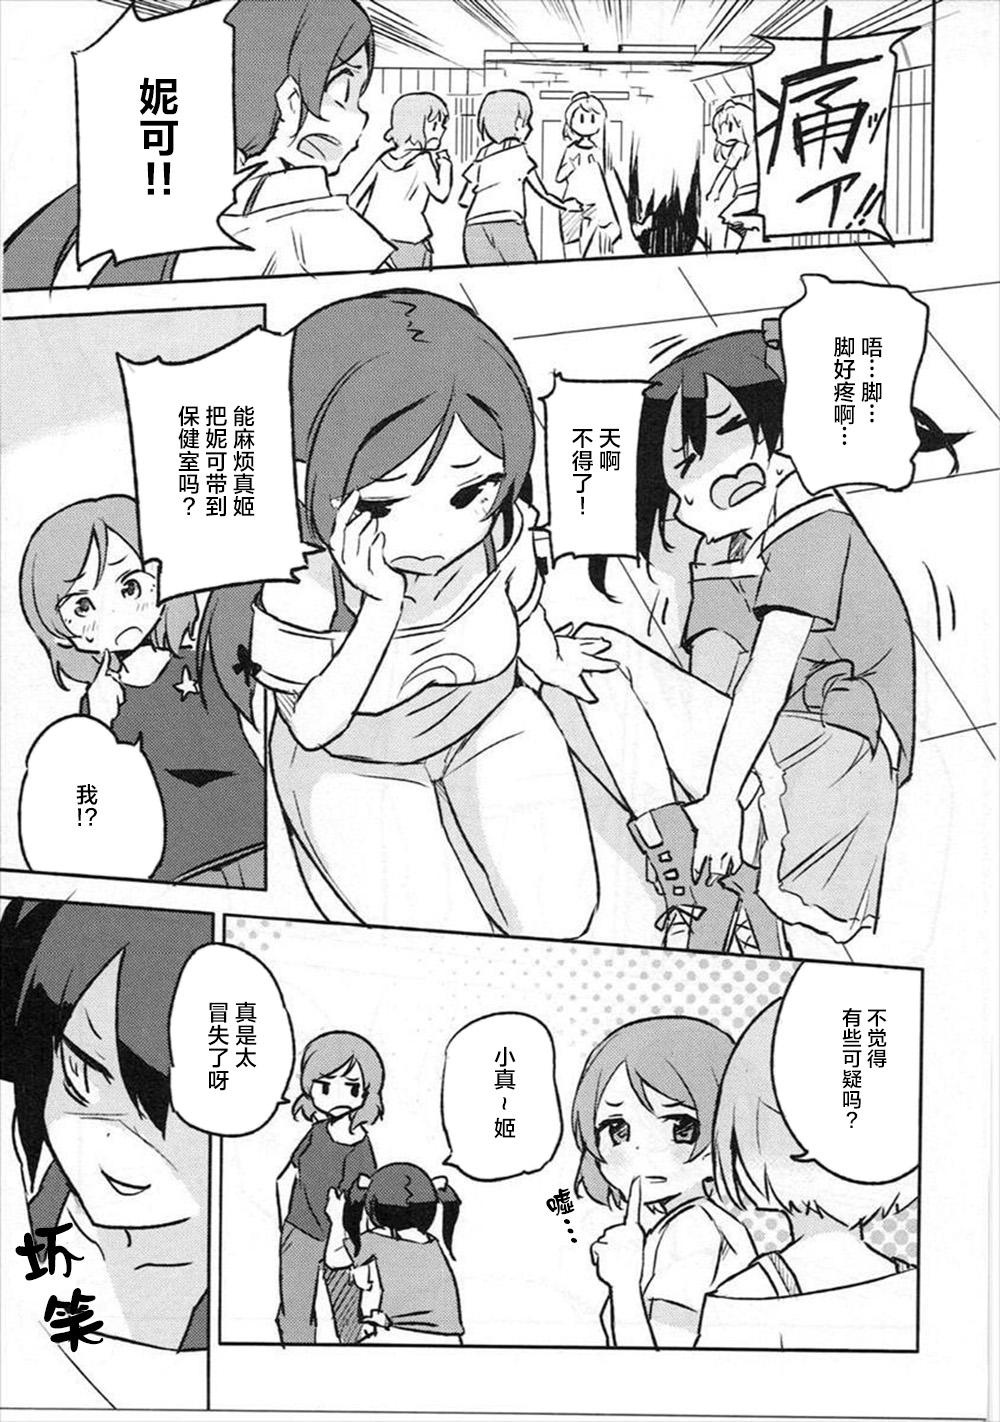 Indonesian Liberation!! - Love live Gang - Page 6